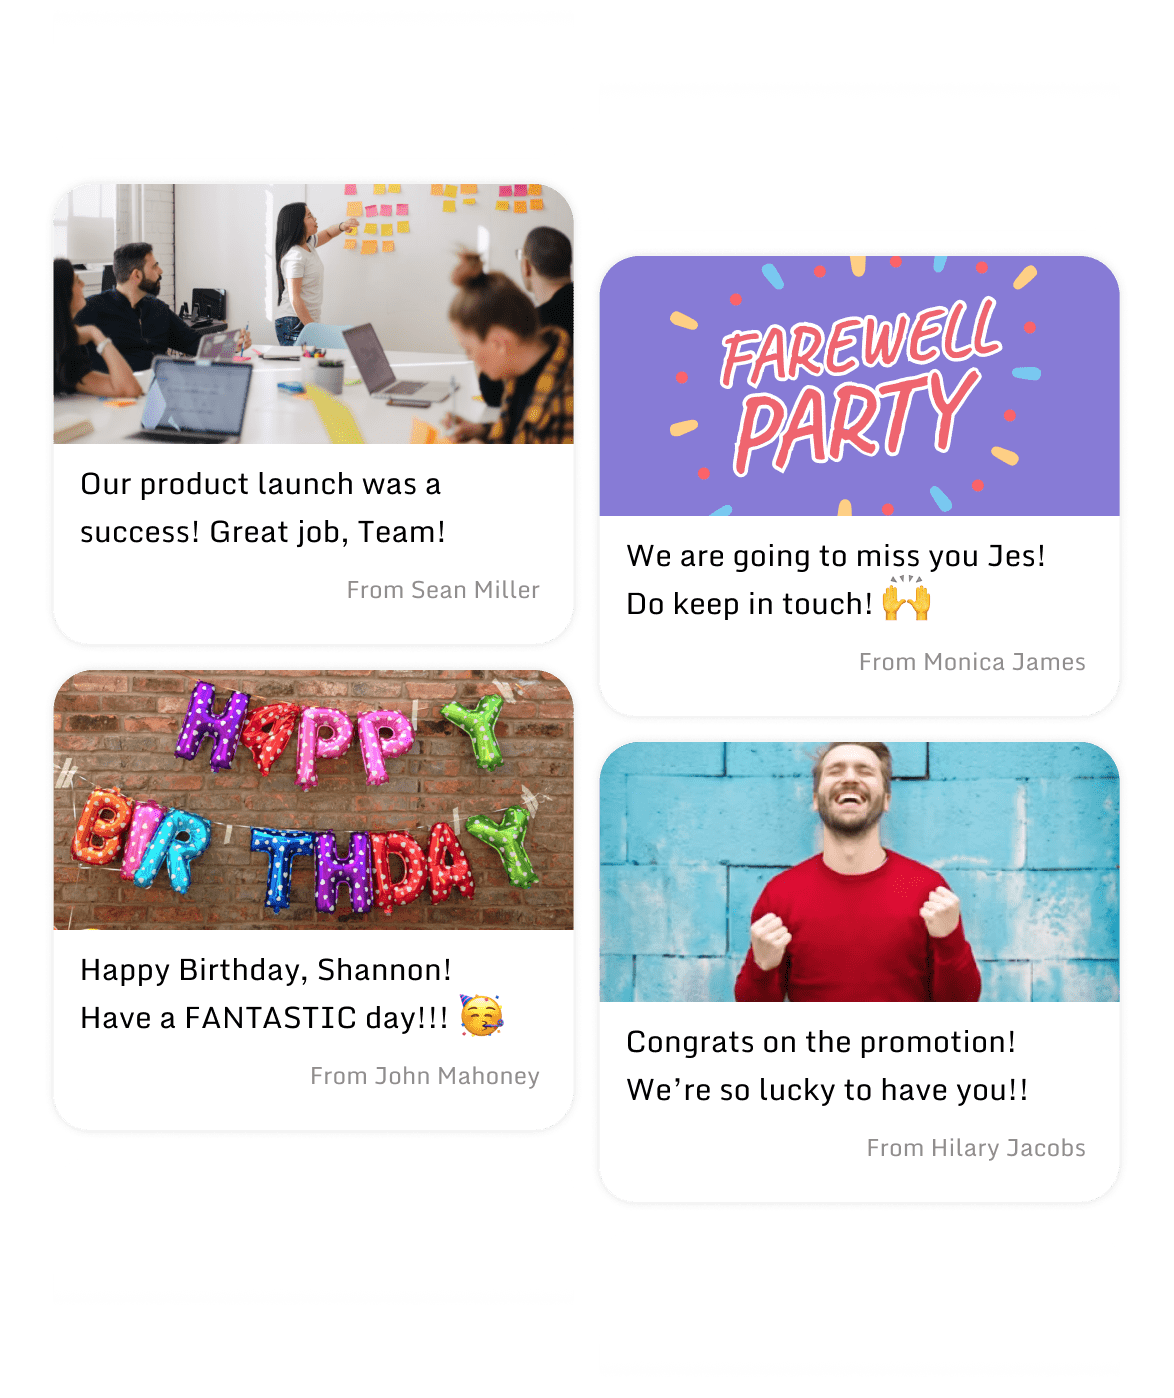 Various recognition and celebration Kudoboard posts